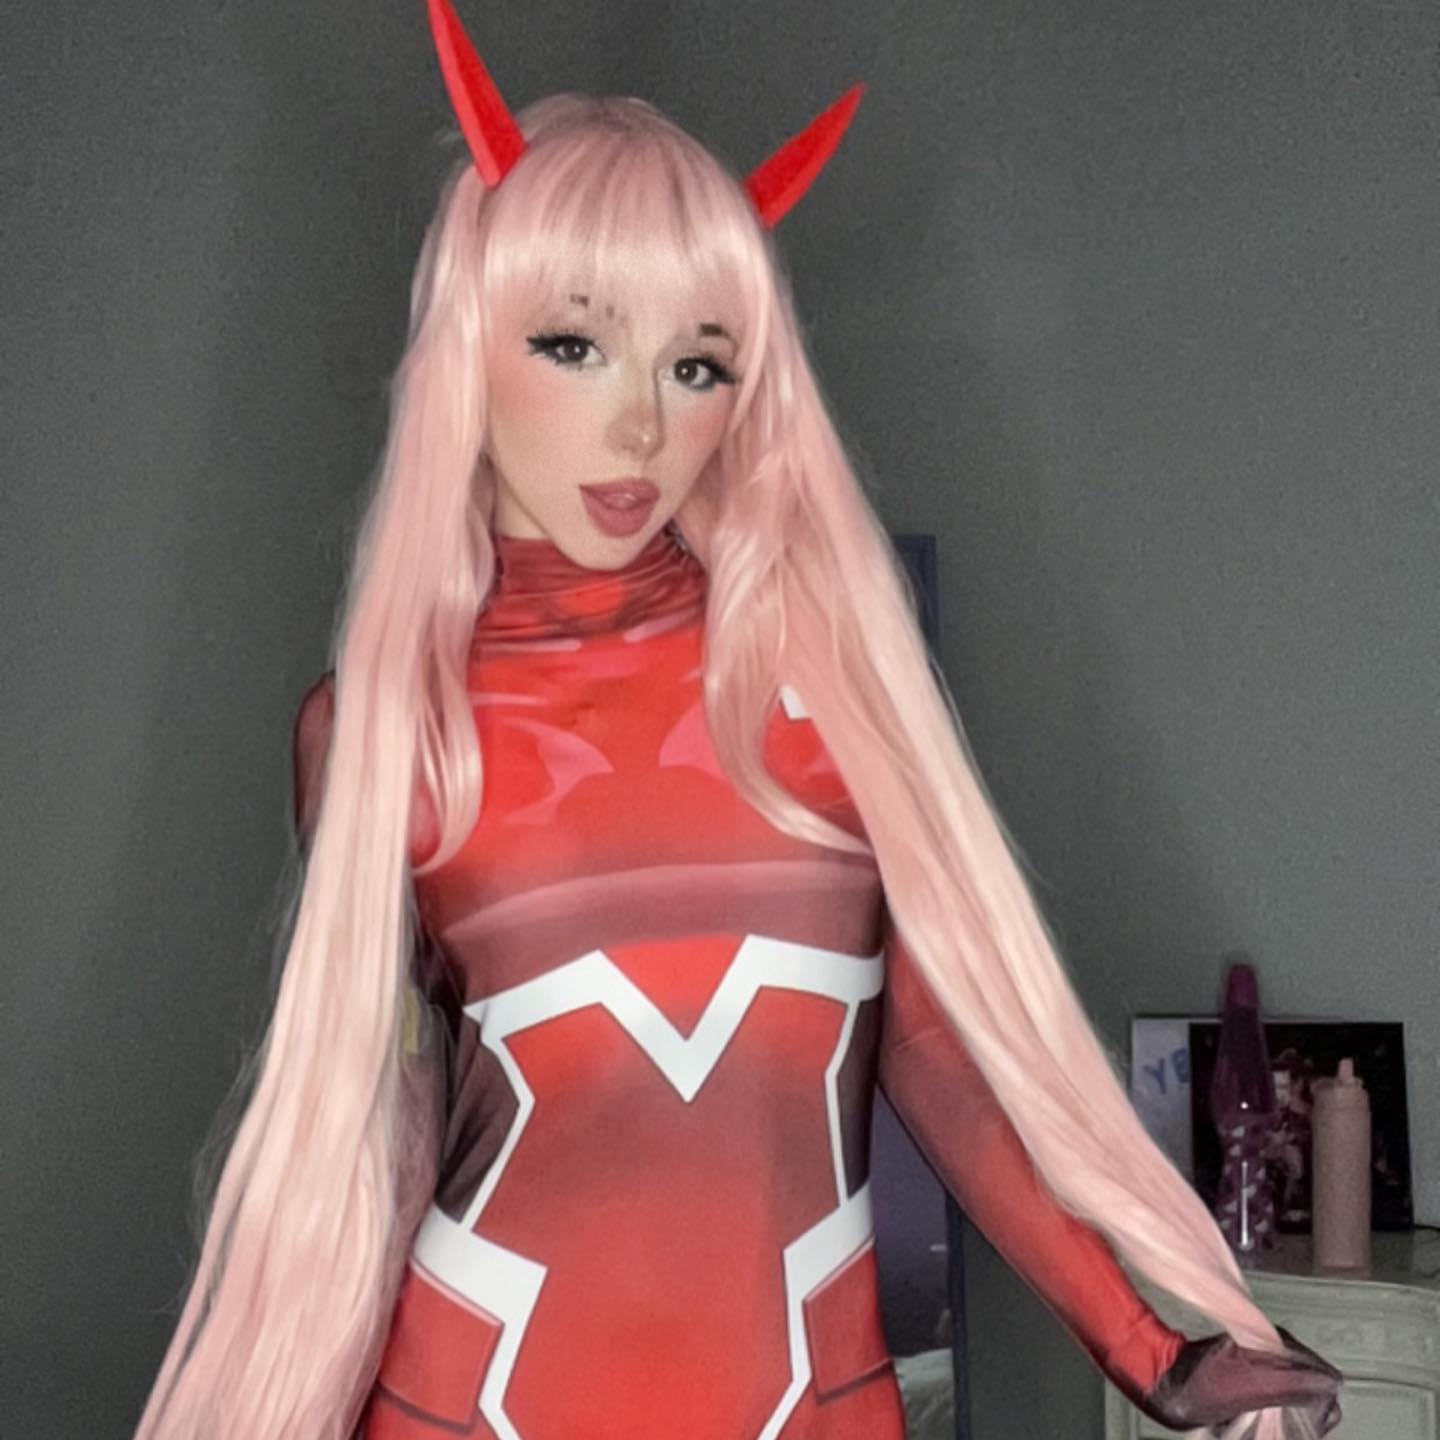 002 | darling in the franxx 🥰💕 this was one of the first anime i ever watched :3 
•
💭comment ur first anime 🫶
•
•
 #explore #explorepage #cosplay #cosplaygirl #egirl #gamergirl #girlgamer #cute #kawaii #goth #alternative #fortnite #valorant #leagueoflegends #ps5 #xbox #gta #gamer #goth #alt #alternative #findom #humanatm #paypig #goddess #drain #cosplaymodel #catgirl #discord #anime #waifu